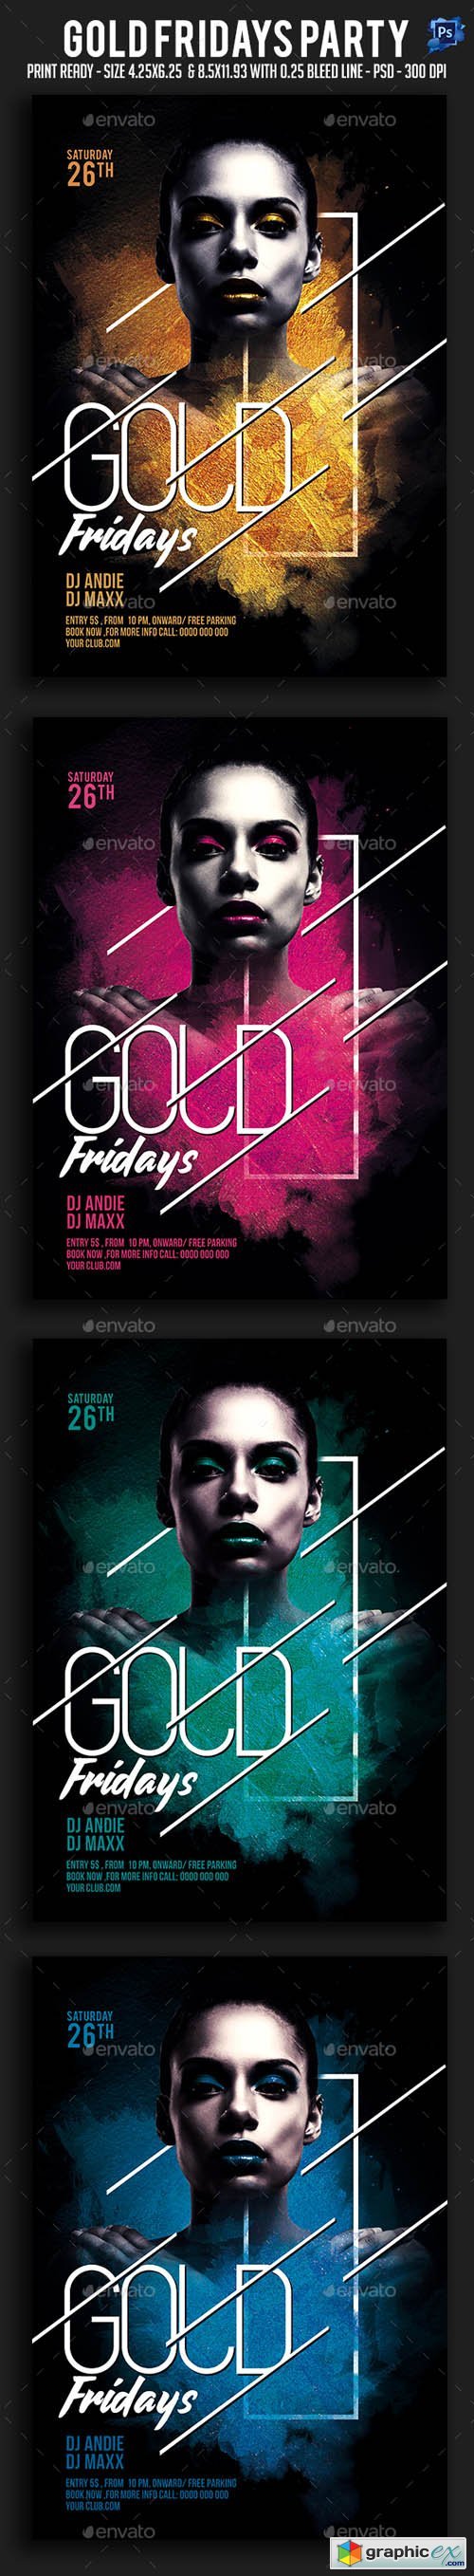 Gold Fridays Party Flyer